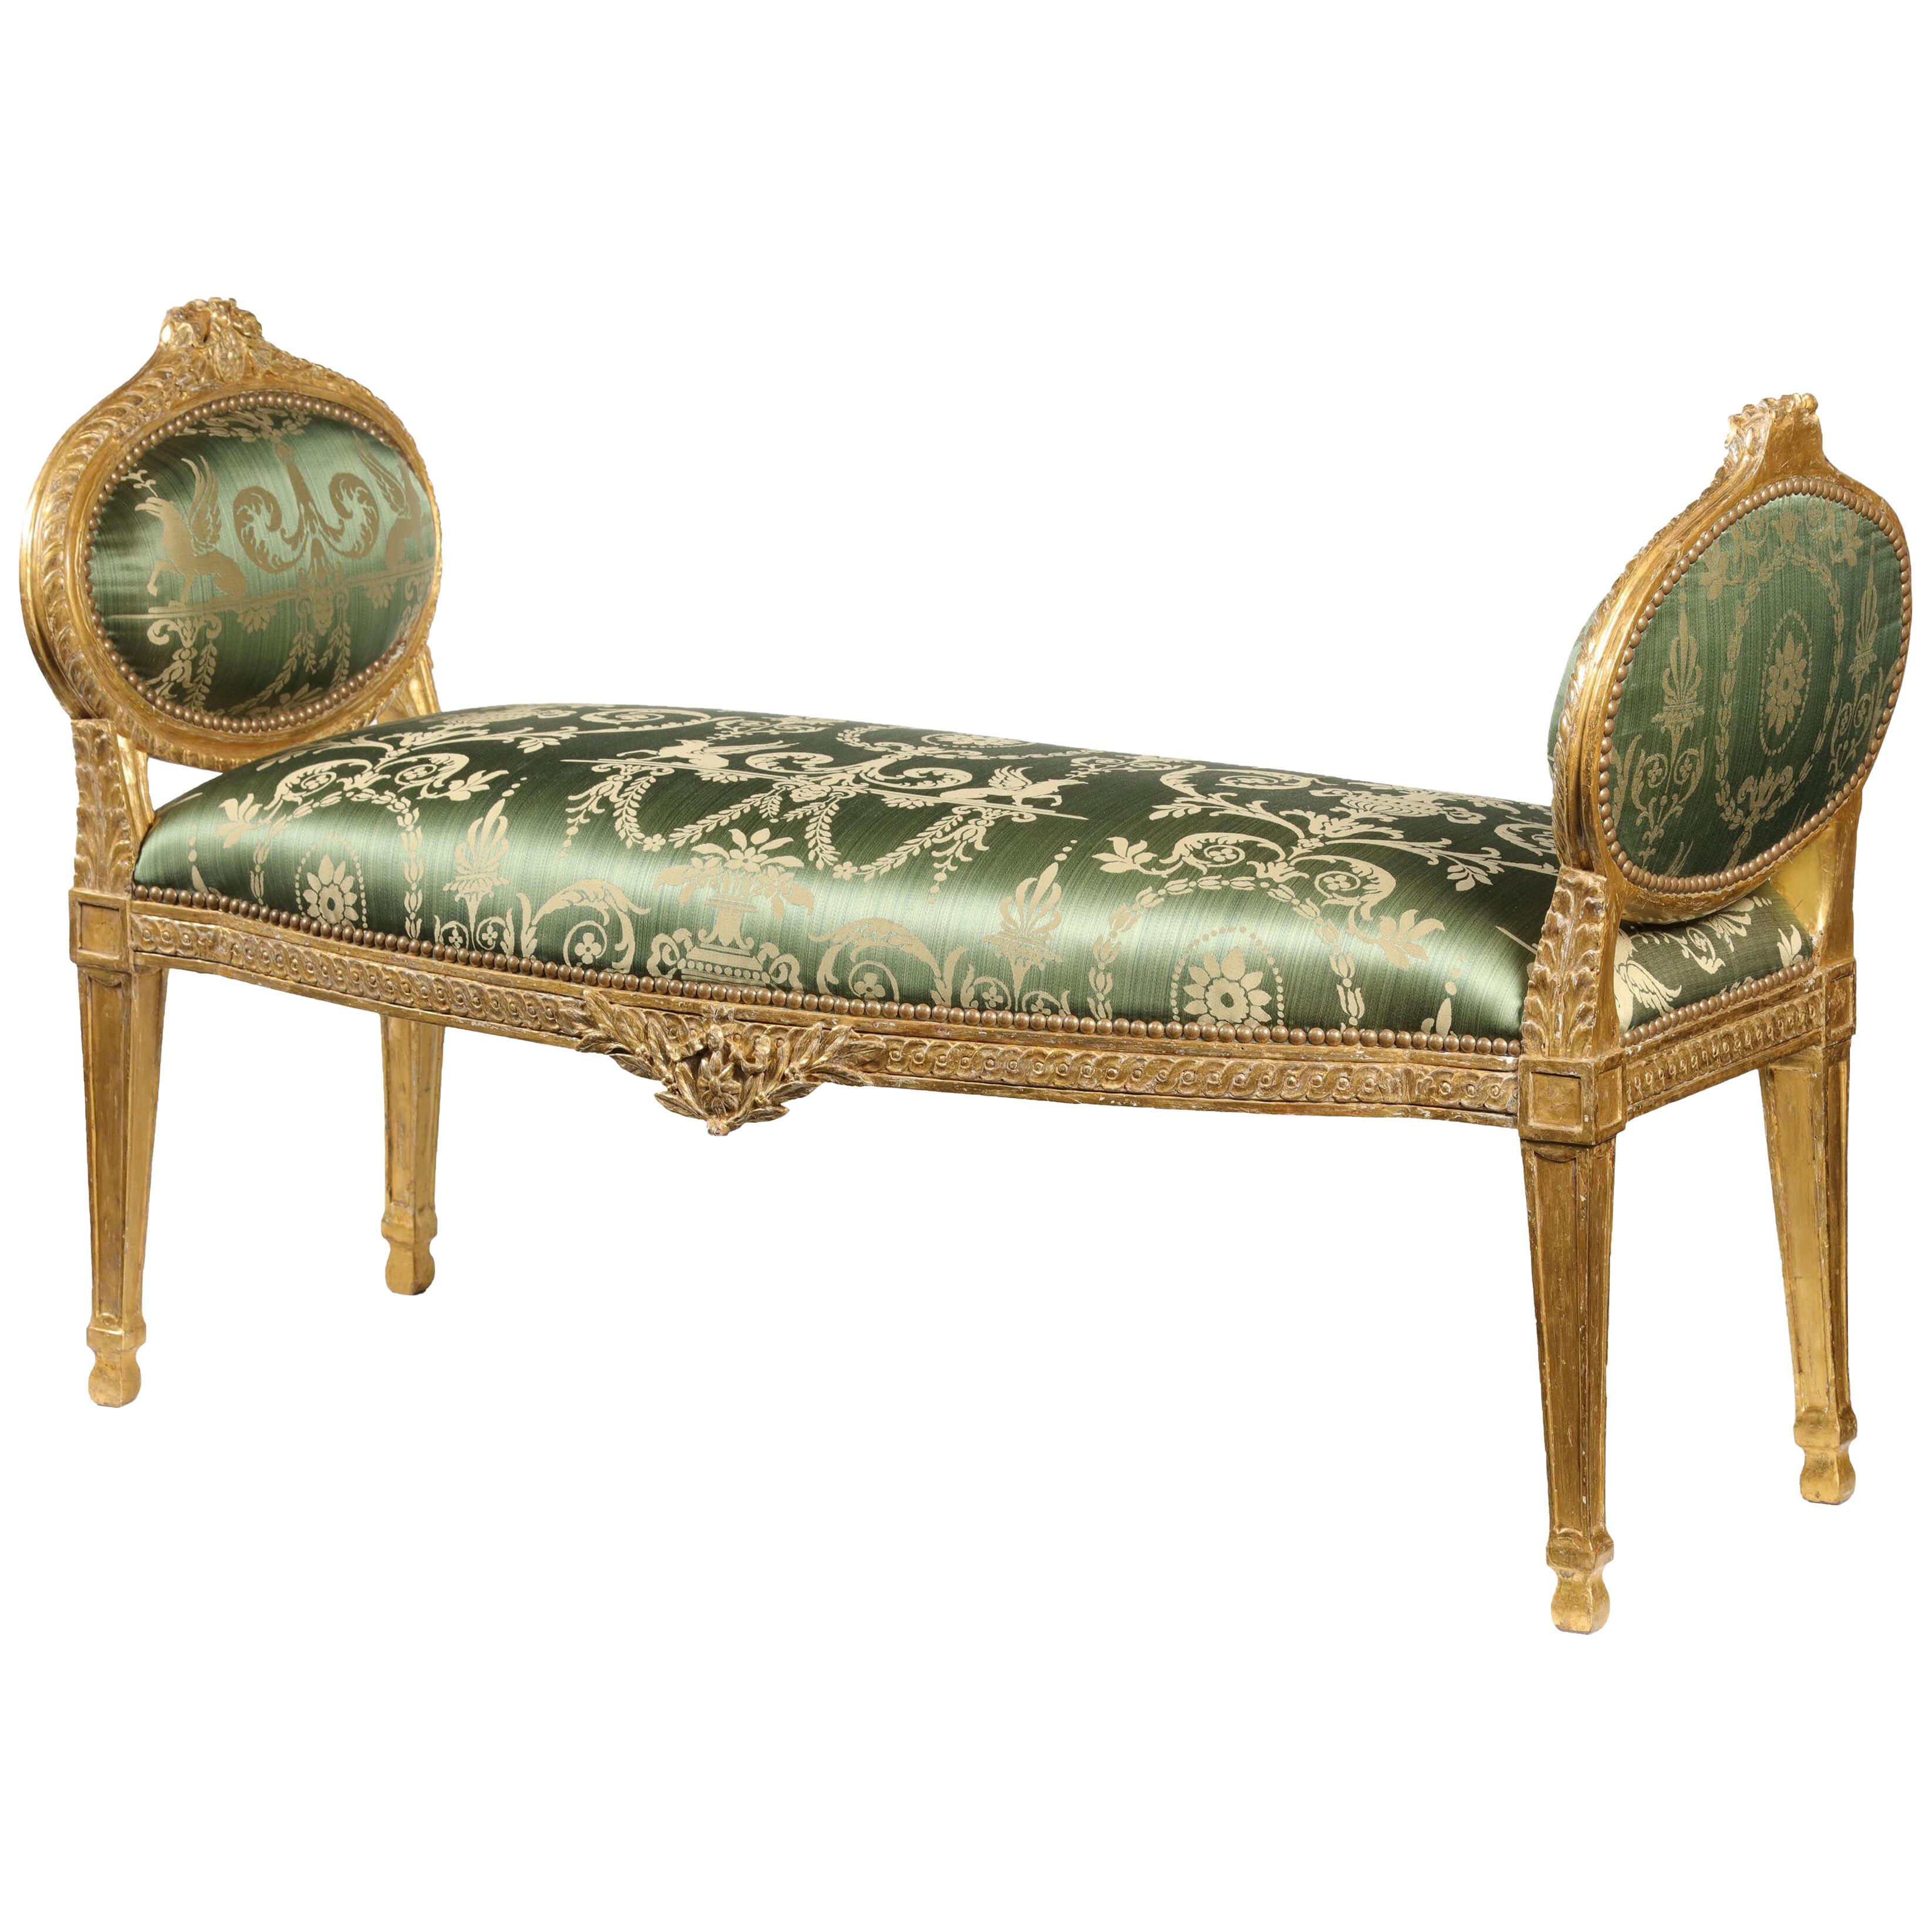 George III carved giltwood window seat attributed to John Linnell